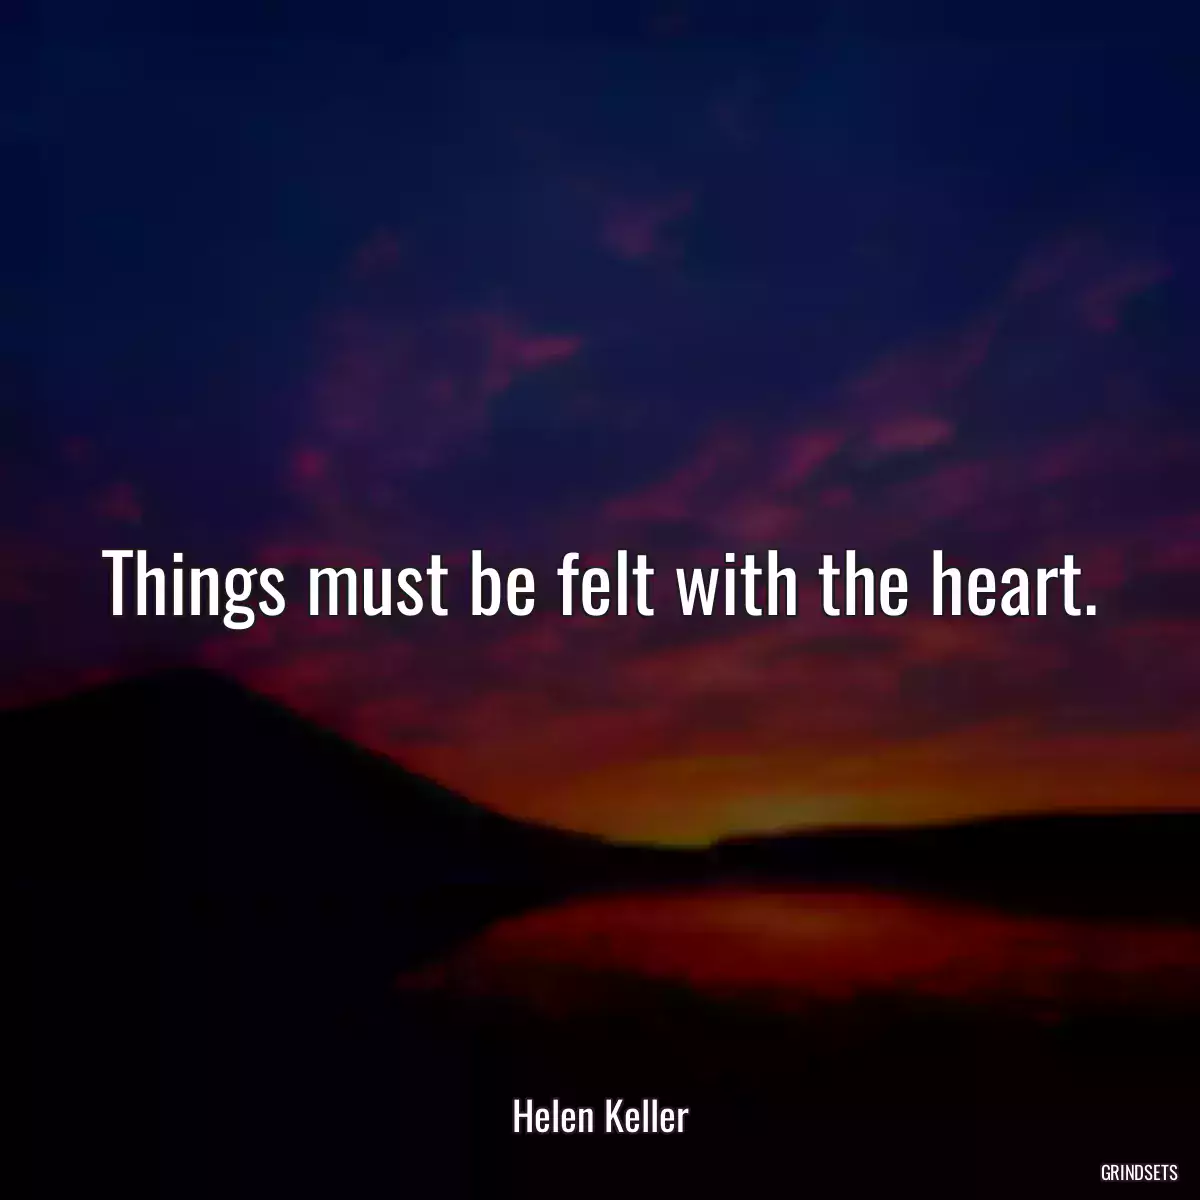 Things must be felt with the heart.